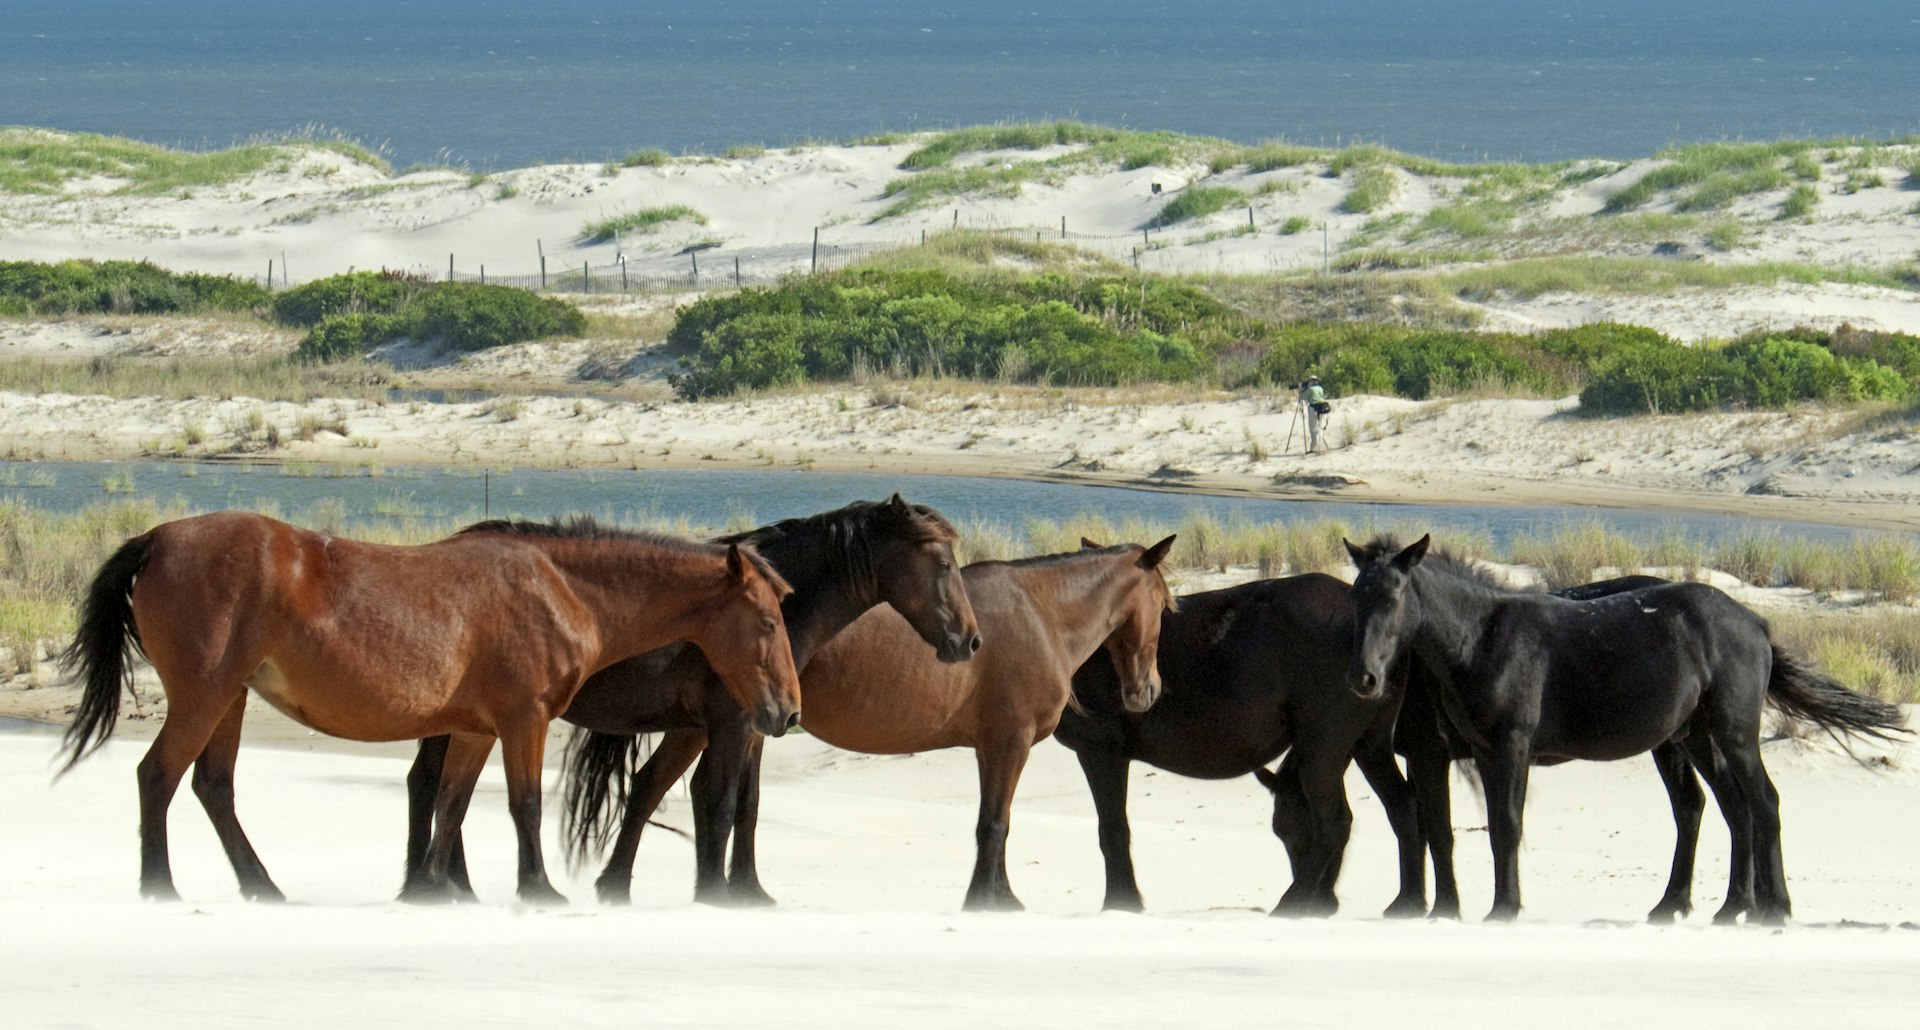 A pack of wild horses stand together on a beach